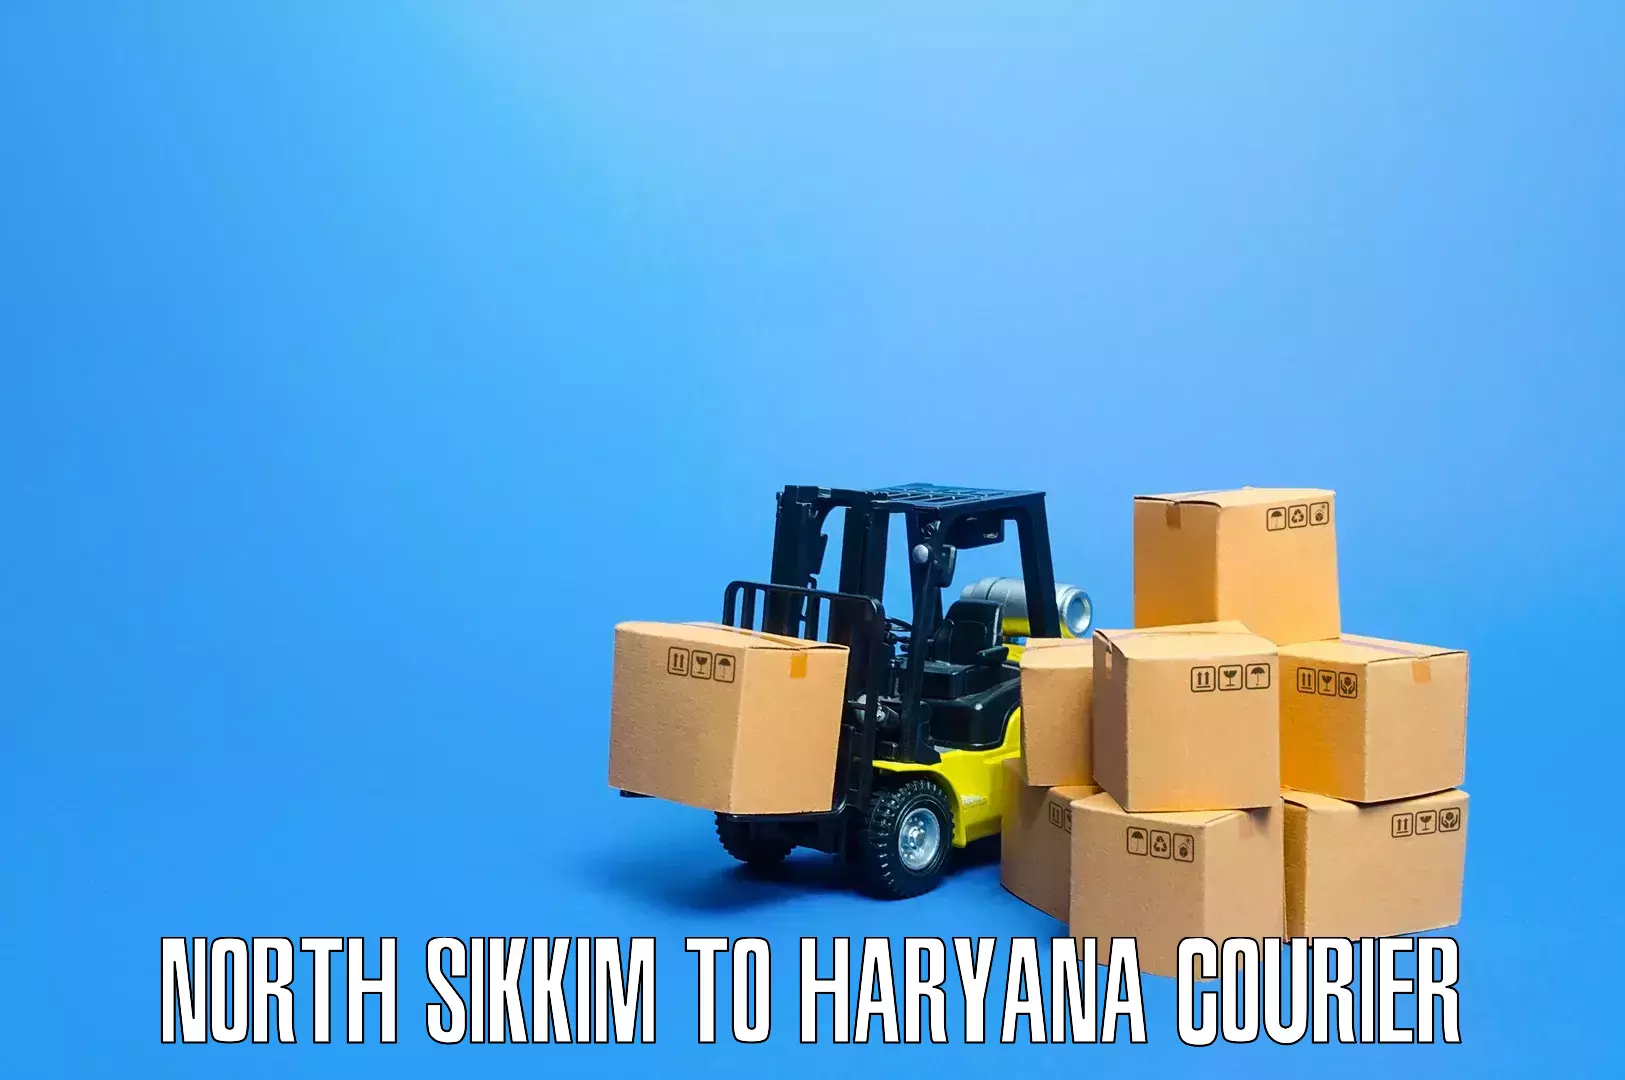 Professional furniture movers North Sikkim to Fatehabad